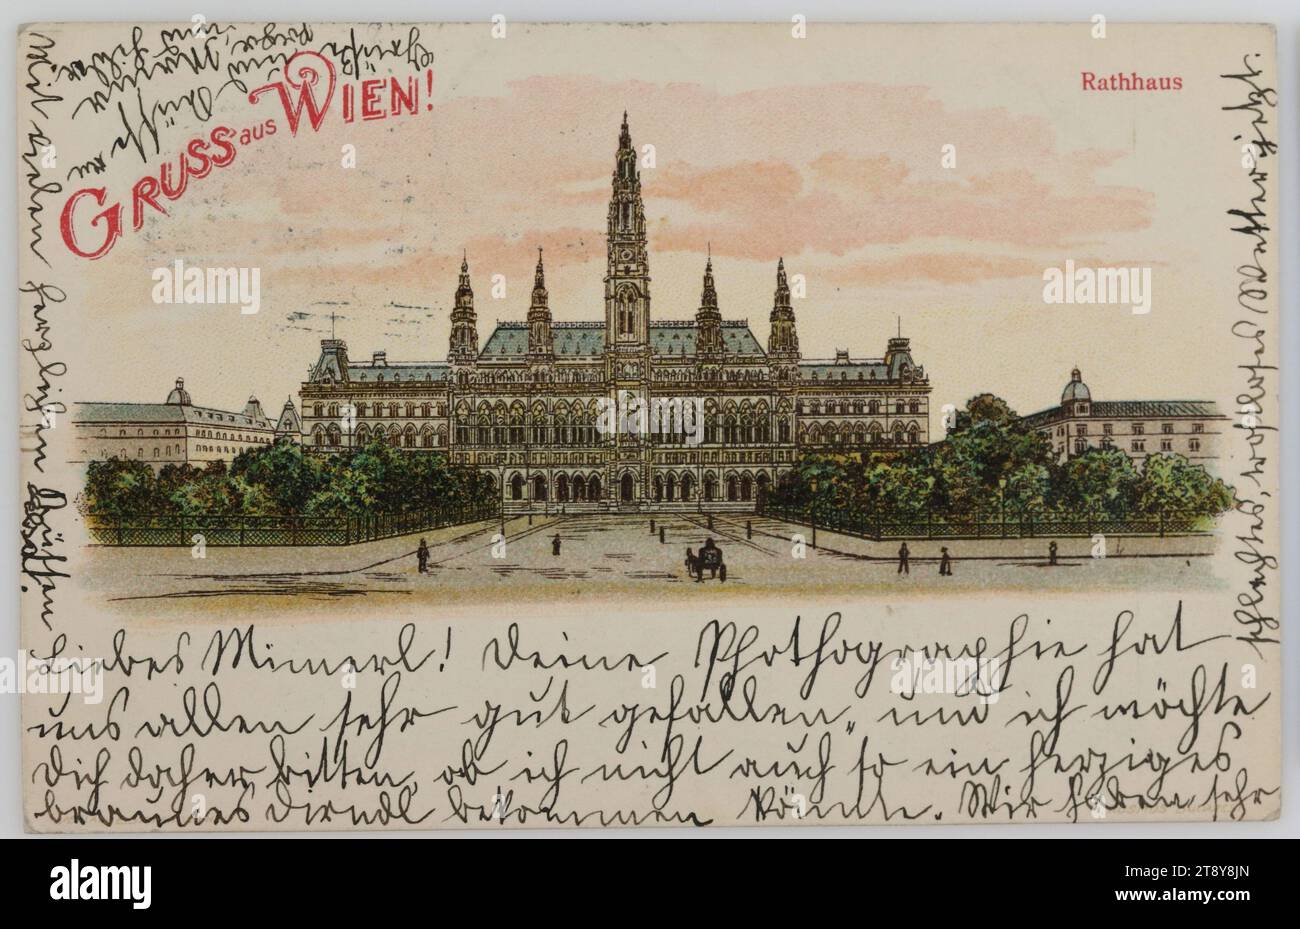 Greeting from Vienna! City Hall, Unknown, Date around 1900, Cardboard, Color lithograph, Inscription, FROM, Vienna, TO, Gries bei Bozen, ADDRESS, Wohlgeboren Fräulein, Gries bei Bozen, Hotel Mon séjour, South Tyrol, MESSAGE, Dear Mimerl! We all liked your phothography very much, and I would therefore like to ask you if I could not also get such a hearty brown dirndl. We are having very bad, dreary weather now, Greetings and kisses to Papa, Mama and Hilda, With many hearty kisses, Elsa, Sights, Ringstrasse, Park, Media and Communication, Postcards with transliteration Stock Photo